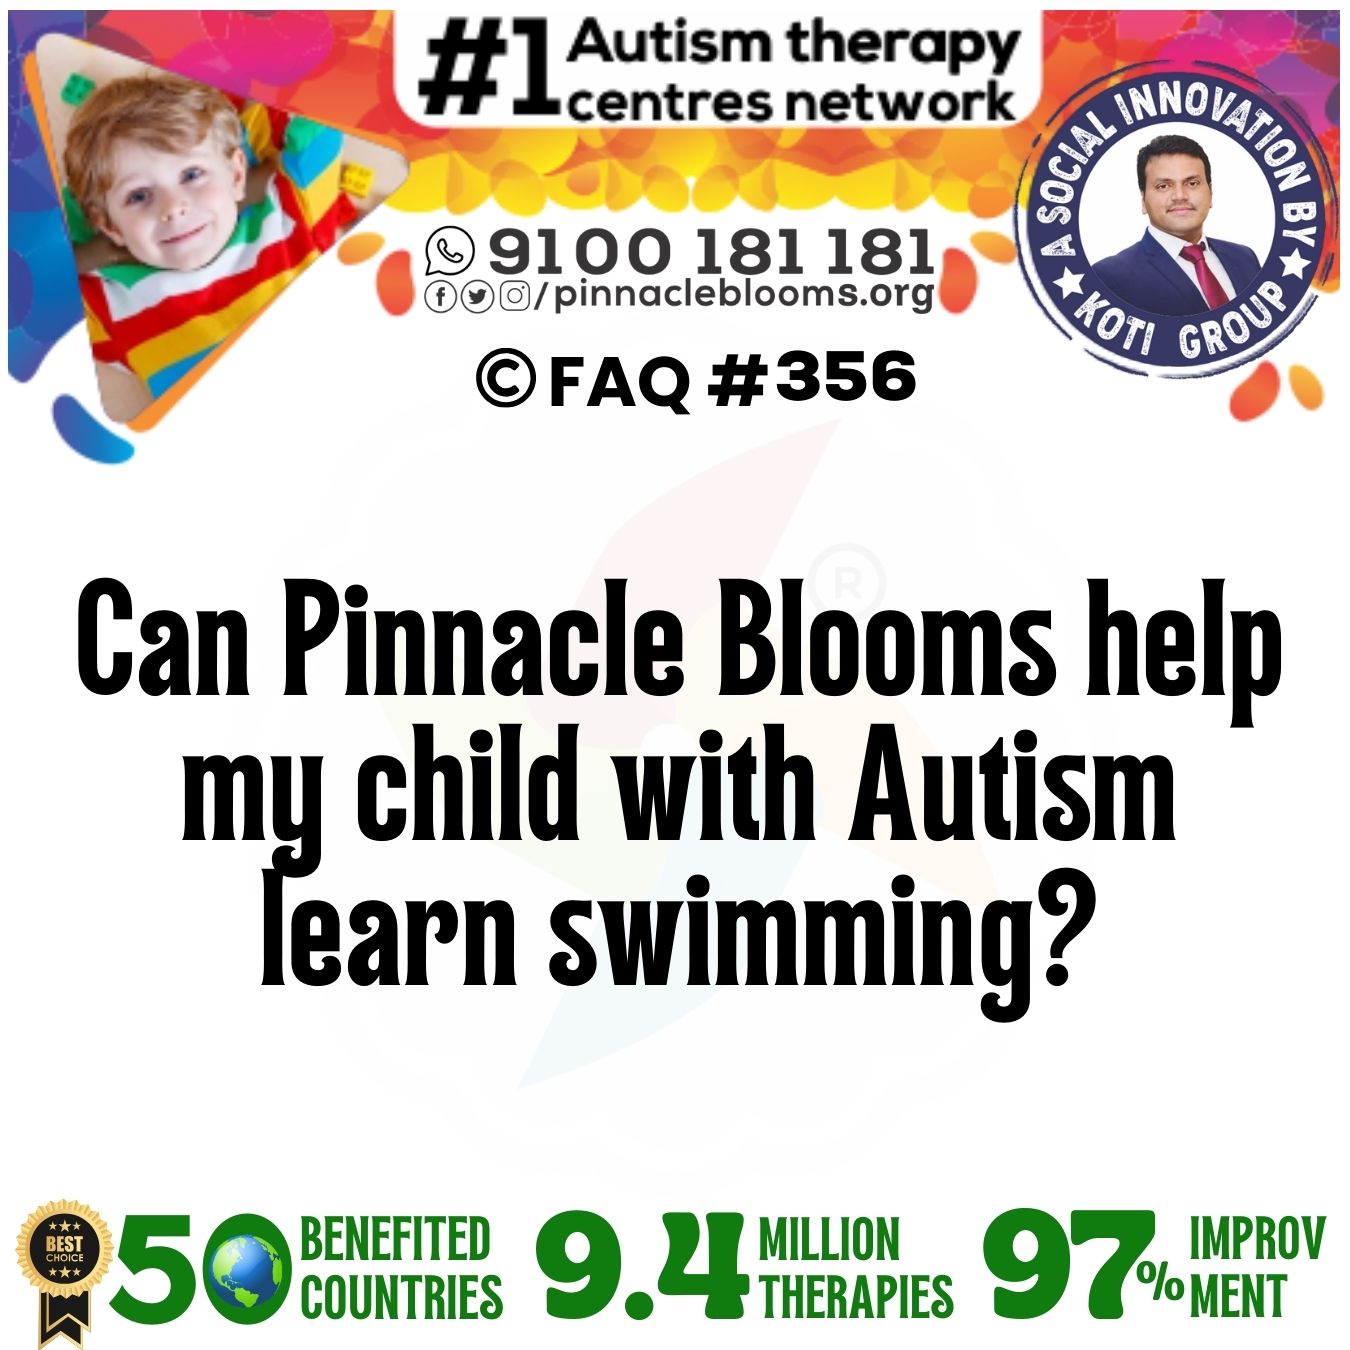 Can Pinnacle Blooms help my child with Autism learn swimming?